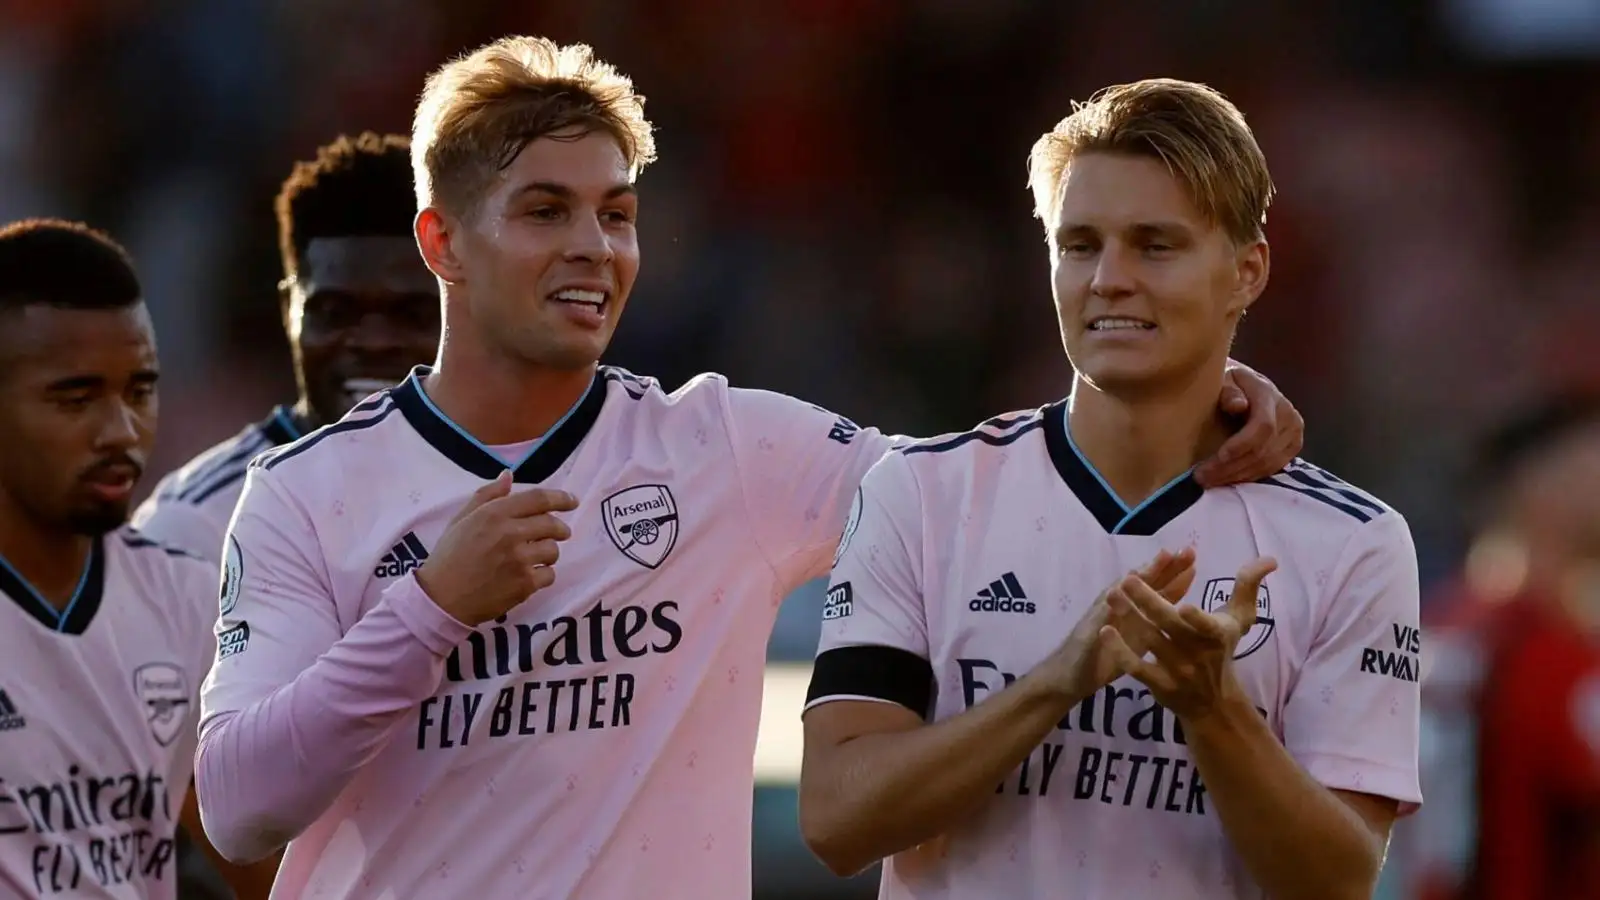 Arsenal duo Emile Smith Rowe and Martin Odegaard